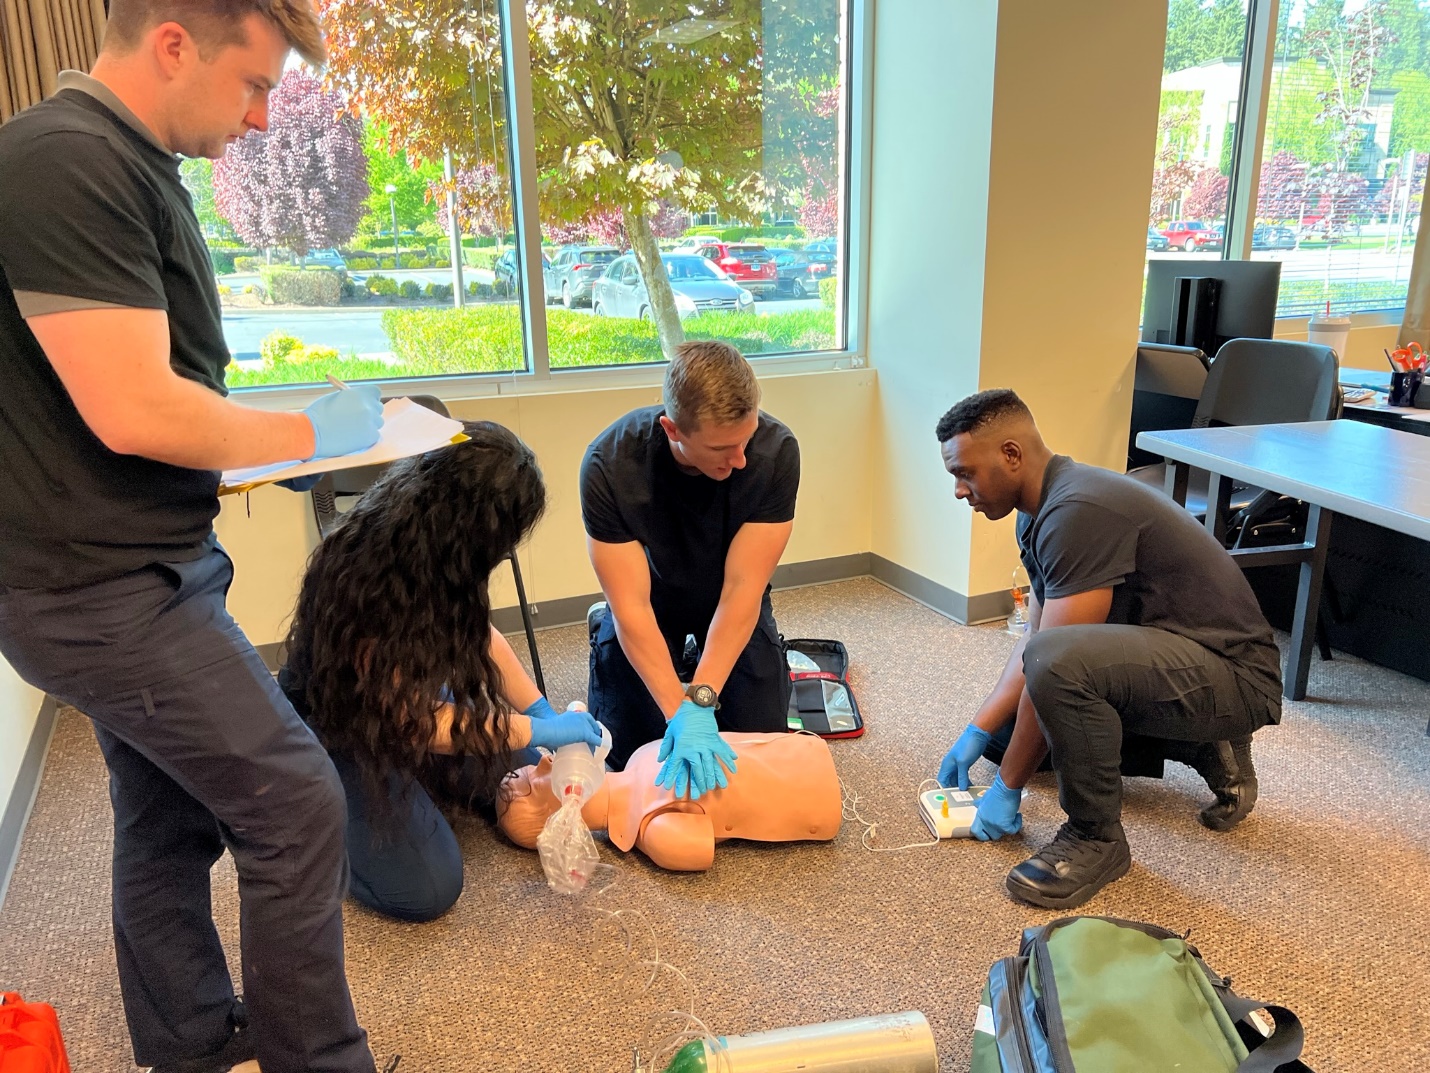 Photo of 4 EMTs showing team dynamics. One EMT is performing chest compressions on manikin, another is providing ventilations via BVM, another is operating AED and the forth is documenting events